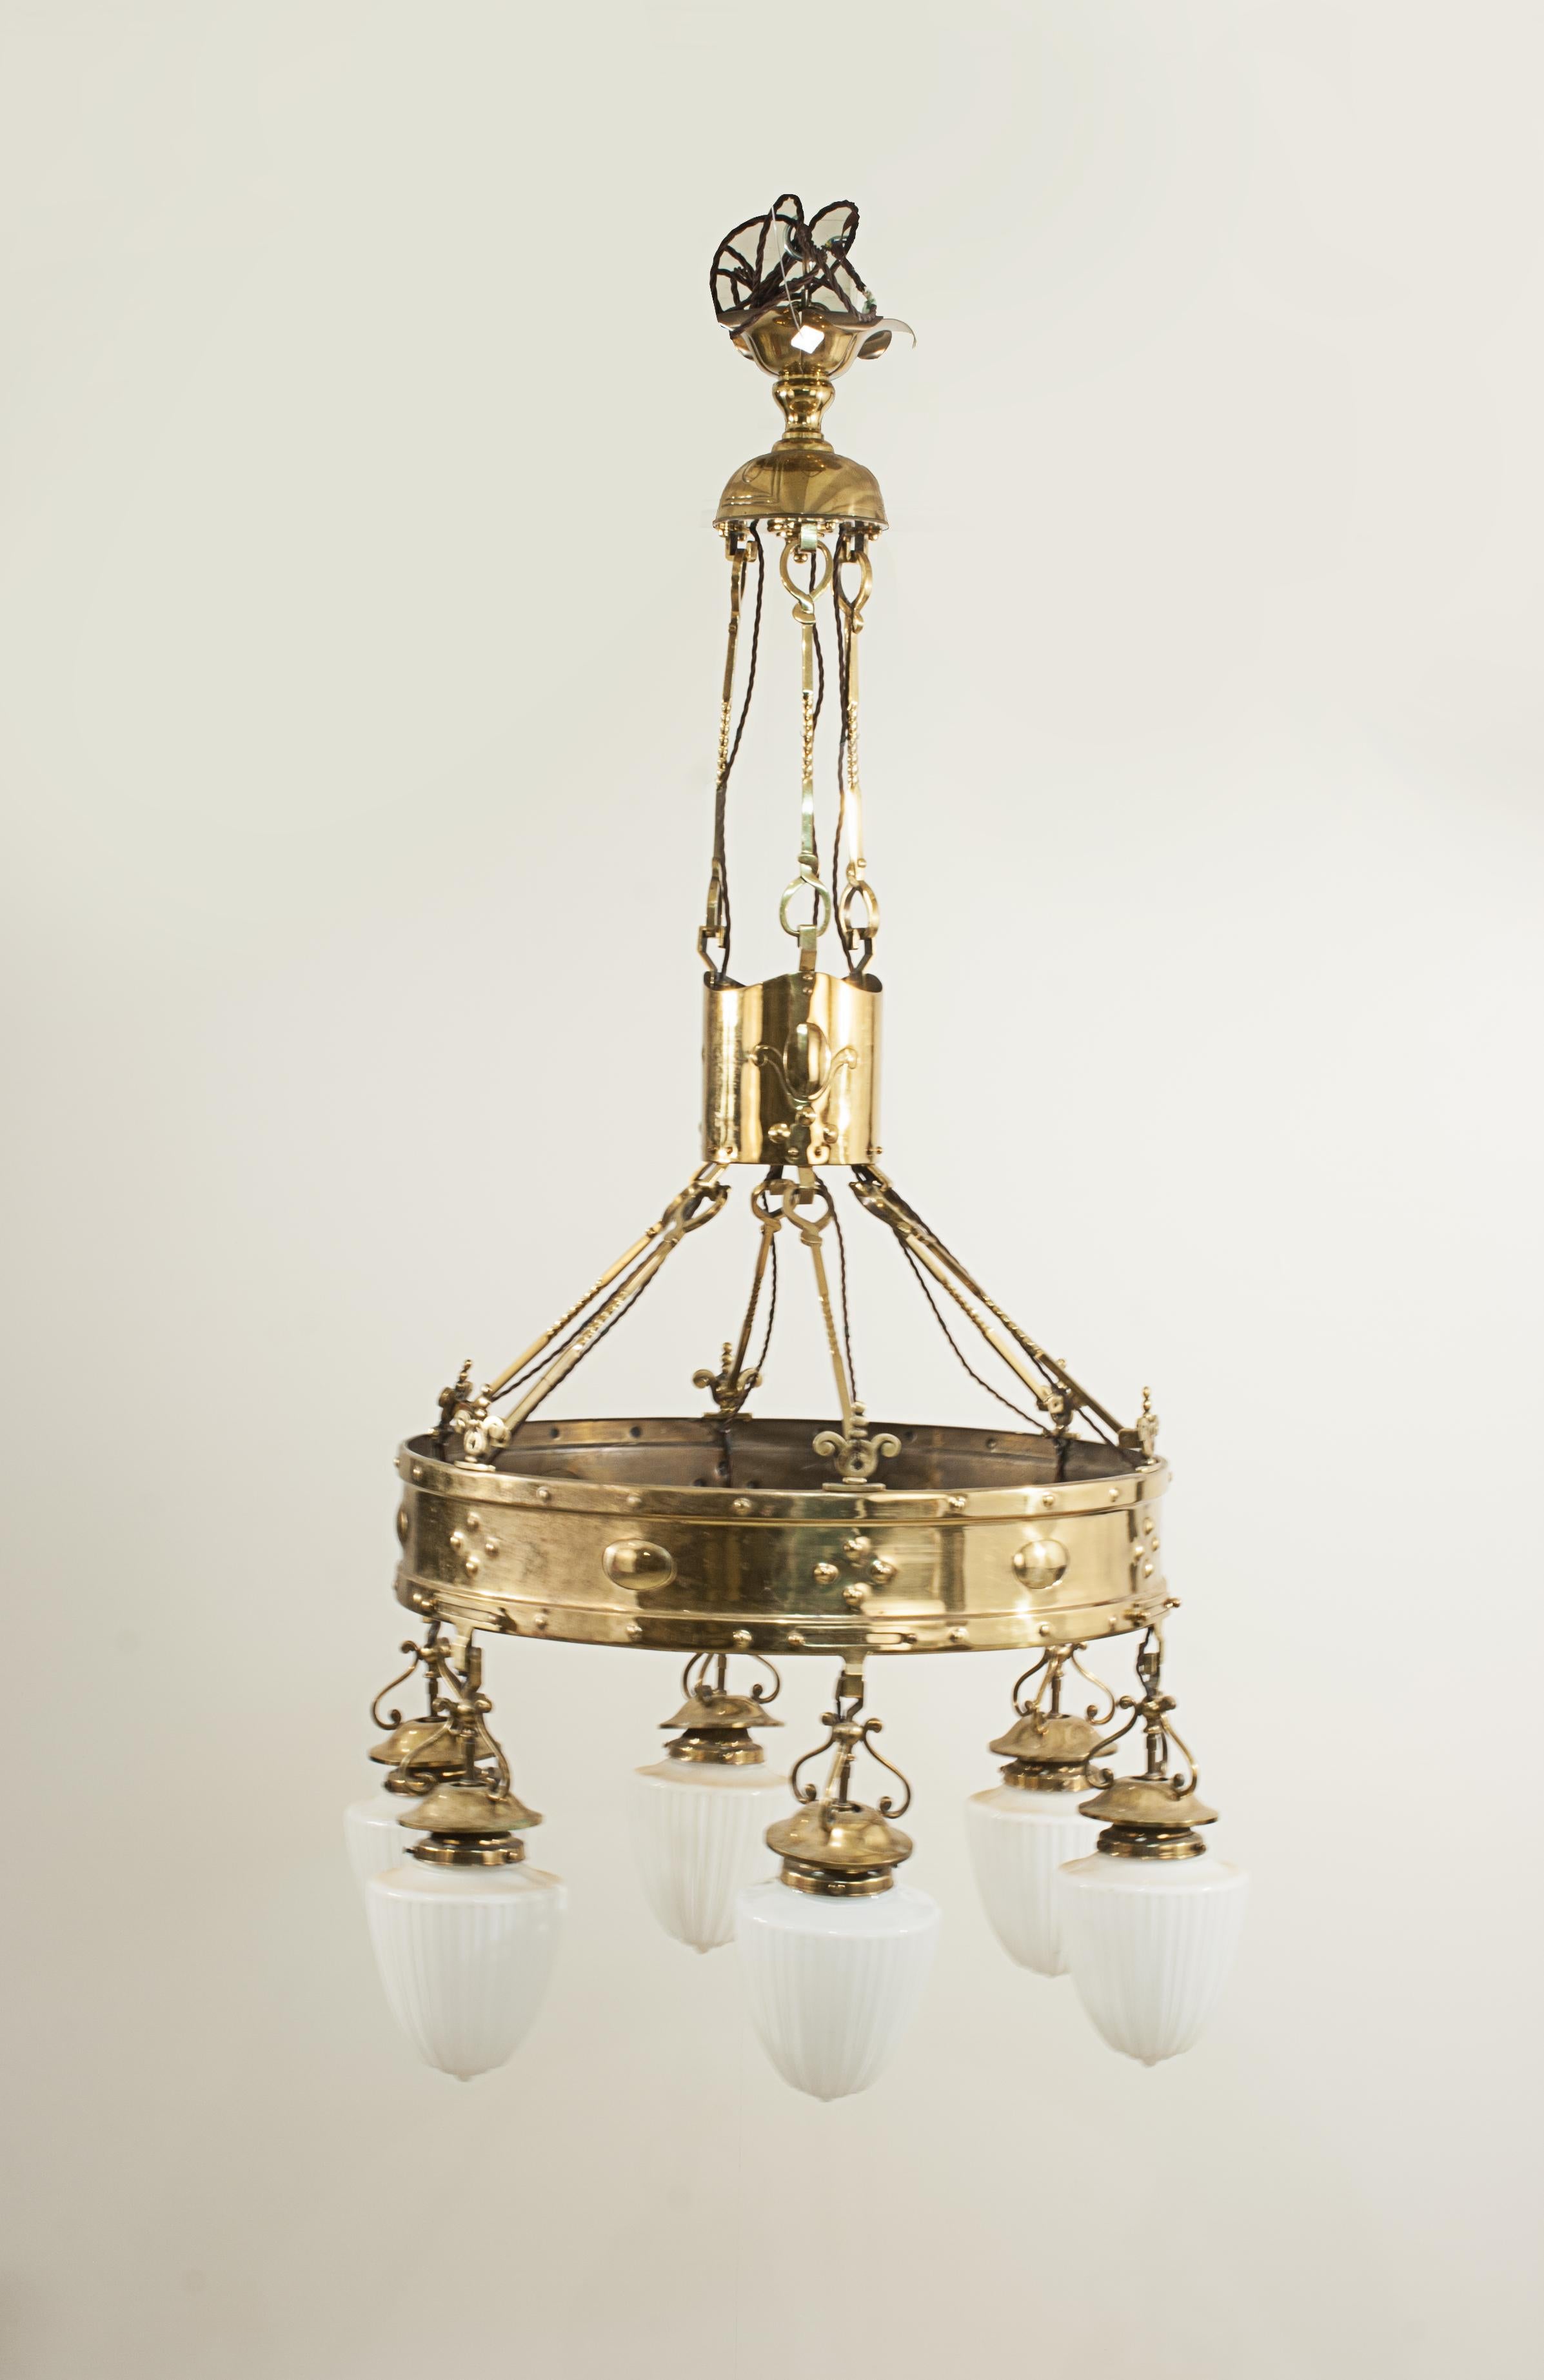 Arts & Crafts brass chandelier.
Edwardian Arts & Crafts elaborate brass six branch electrolier ceiling light. The Chandelier compromising of a large 66 cm brass band with six hanging light fittings, the fittings with the six original glass shades.